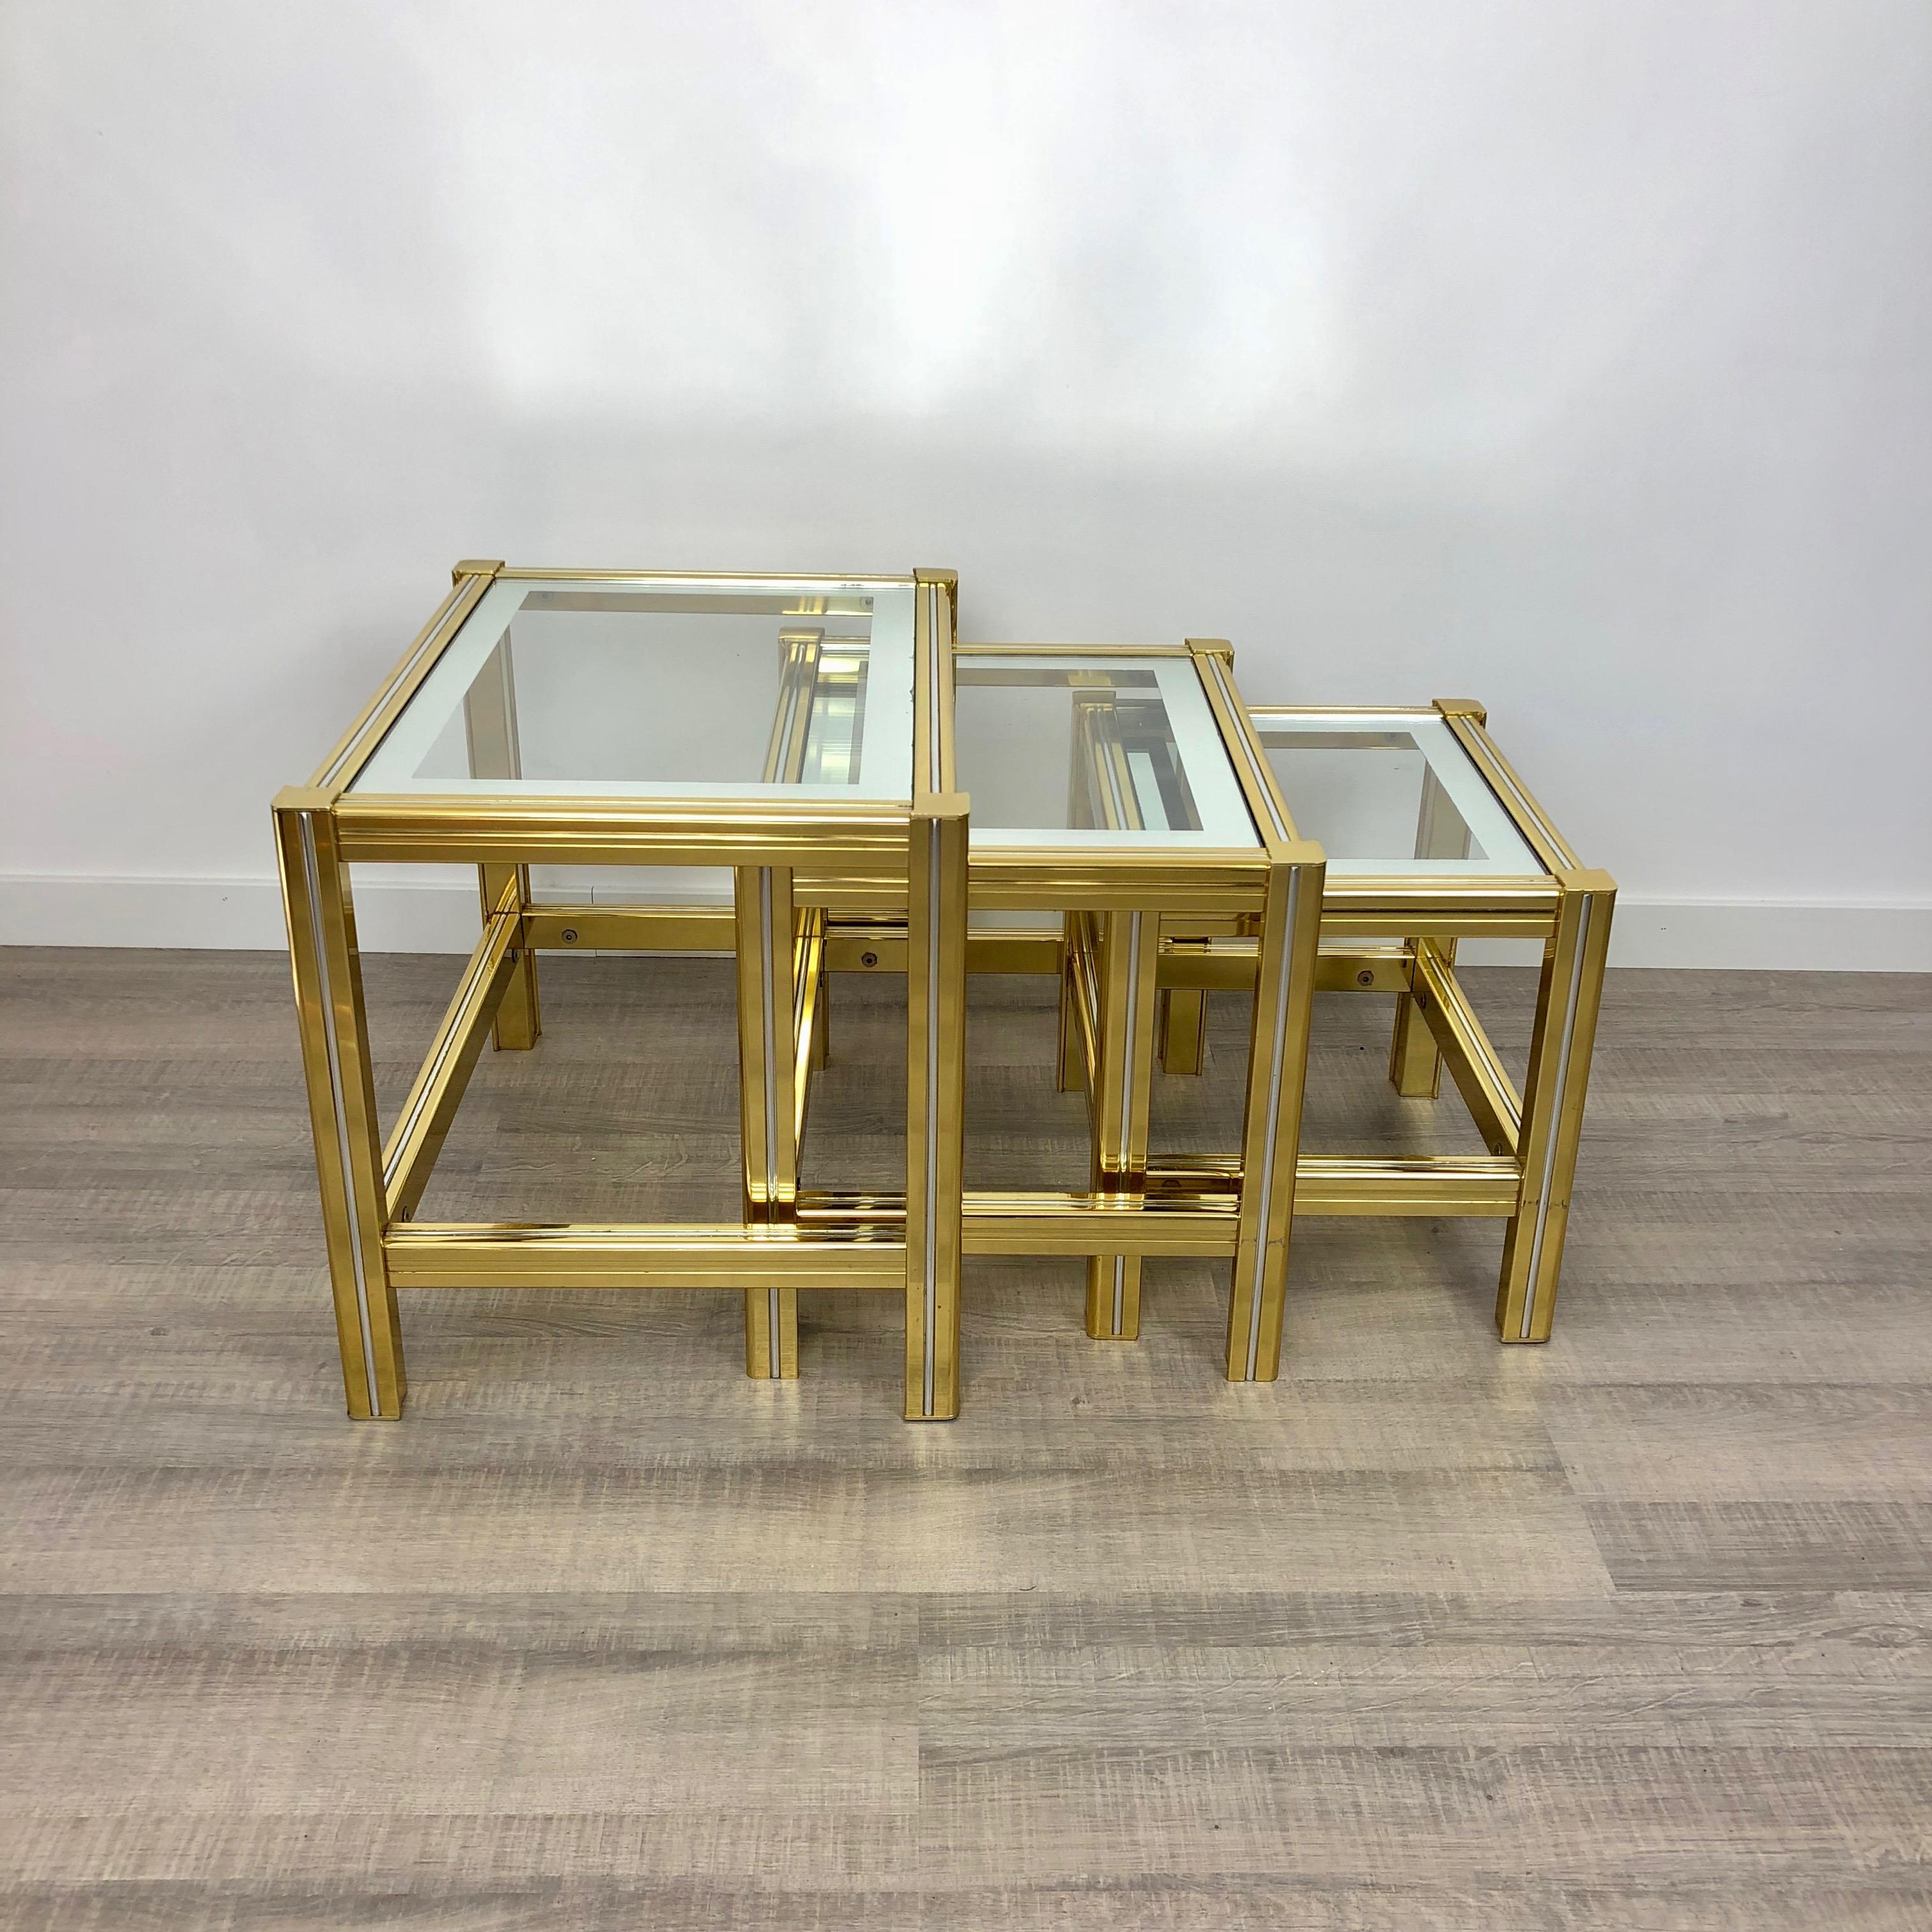 Tris of side or coffee tables in increasing dimensions made of brass, chrome and glass. A midcentury piece of Italian design.